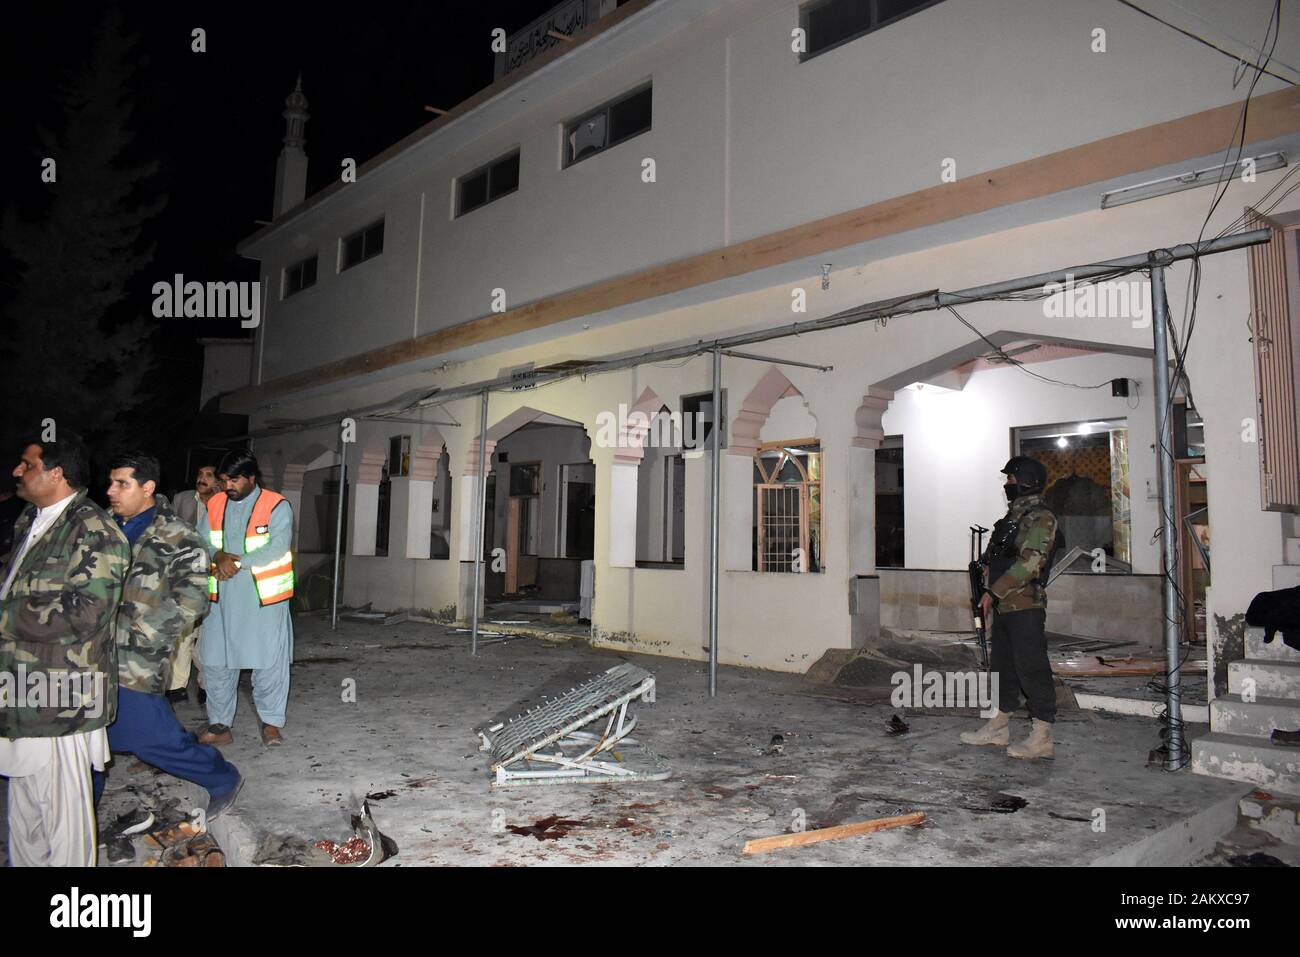 Quetta, Pakistan. 10th Jan 2020. Security members examine the blast site in Quetta, Balochistan province, Pakistan, on Jan. 10, 2020. A blast hit a mosque in Quetta on Friday night, killing at least 14 people and injuring 20 others, a senior police officer said. (Photo by Asad/Xinhua) Credit: Xinhua/Alamy Live News Stock Photo